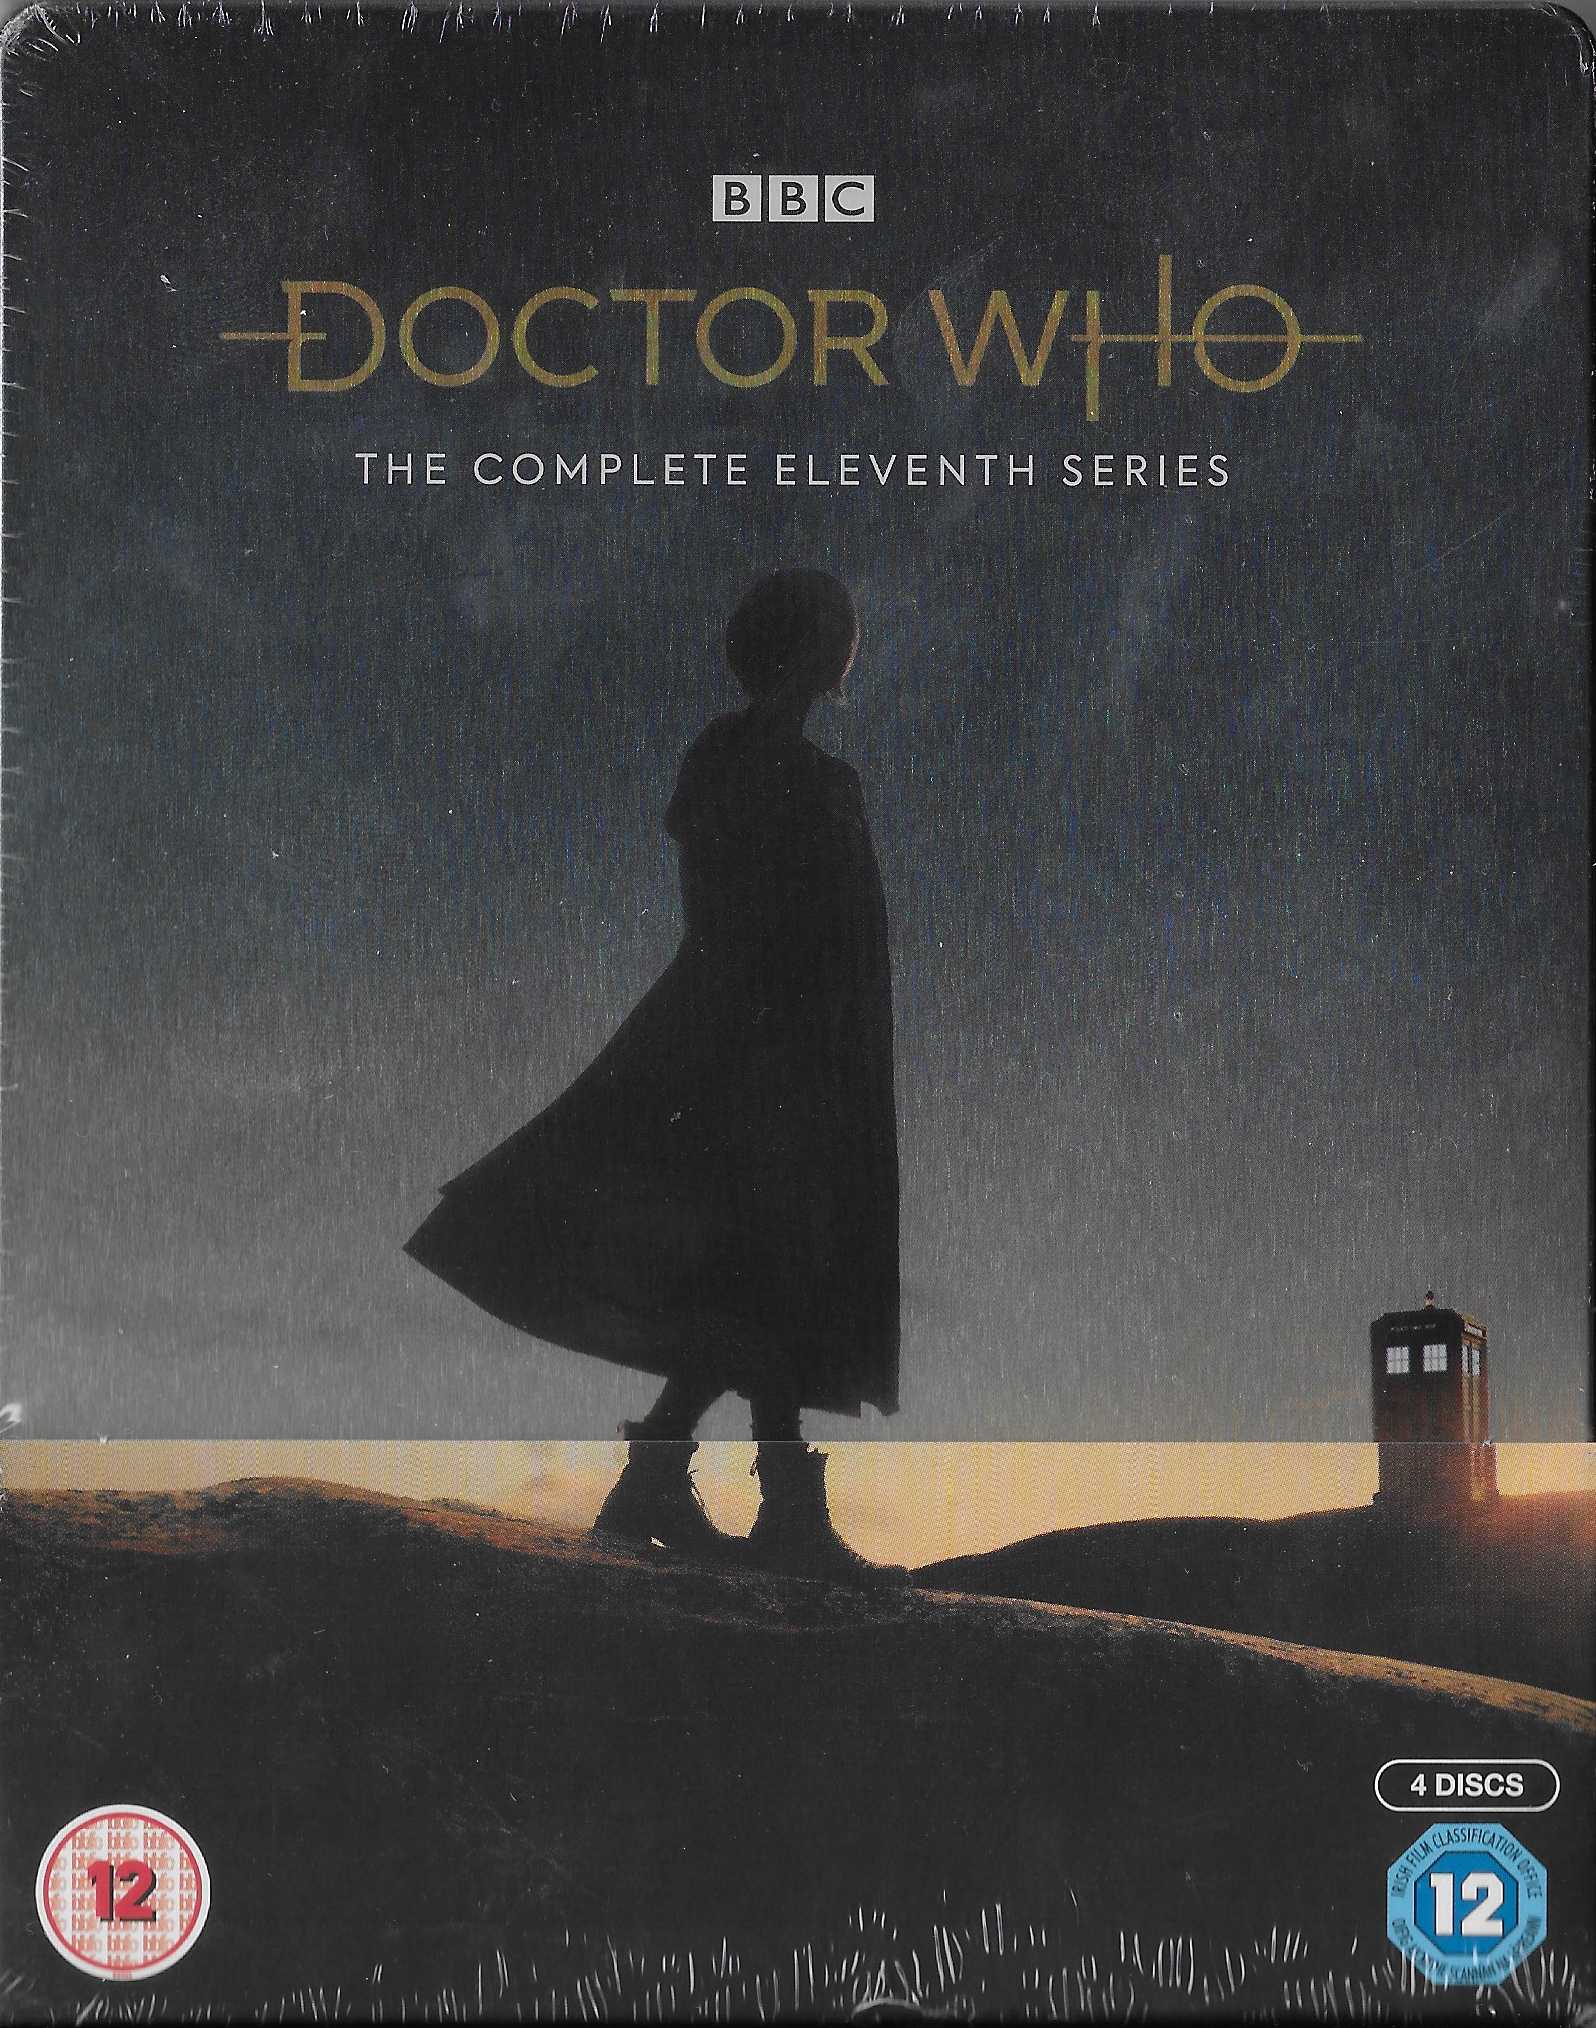 Picture of BBCBD 0455 Doctor Who - The complete series 11 (Limited Amazon steelbook edition) by artist Various from the BBC blu-rays - Records and Tapes library